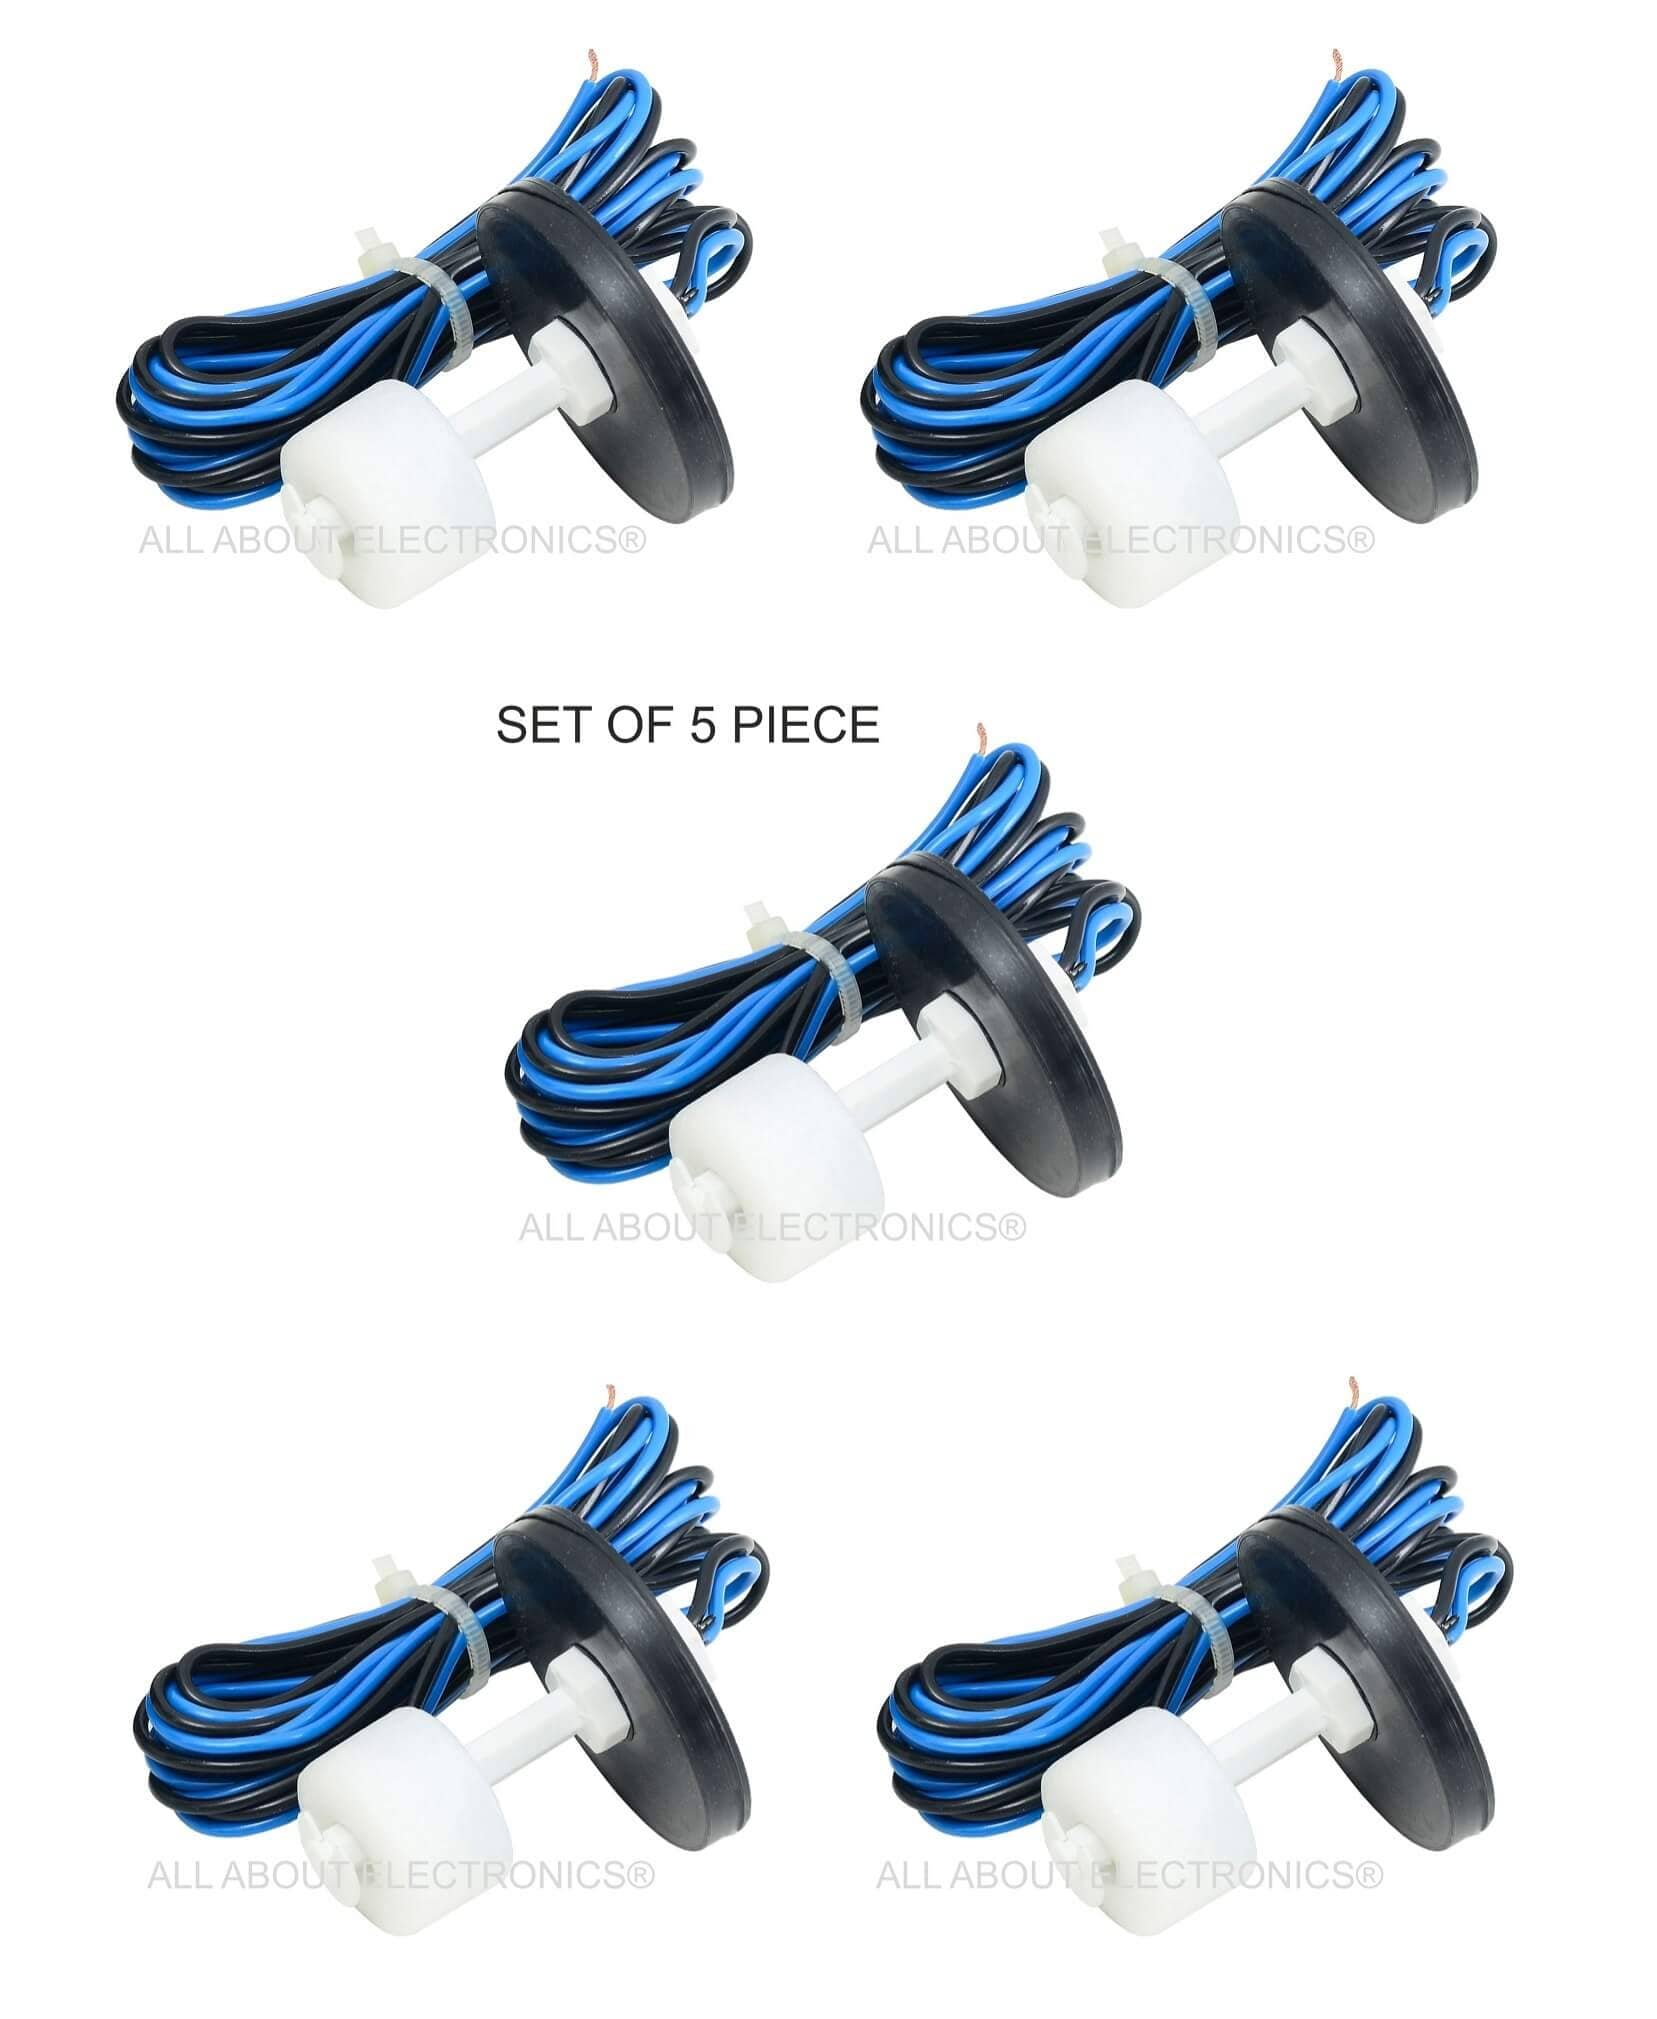 Float Sensor Switch  For Water Level Controller Normally Close Type(NC),Set of 5 Pcs.